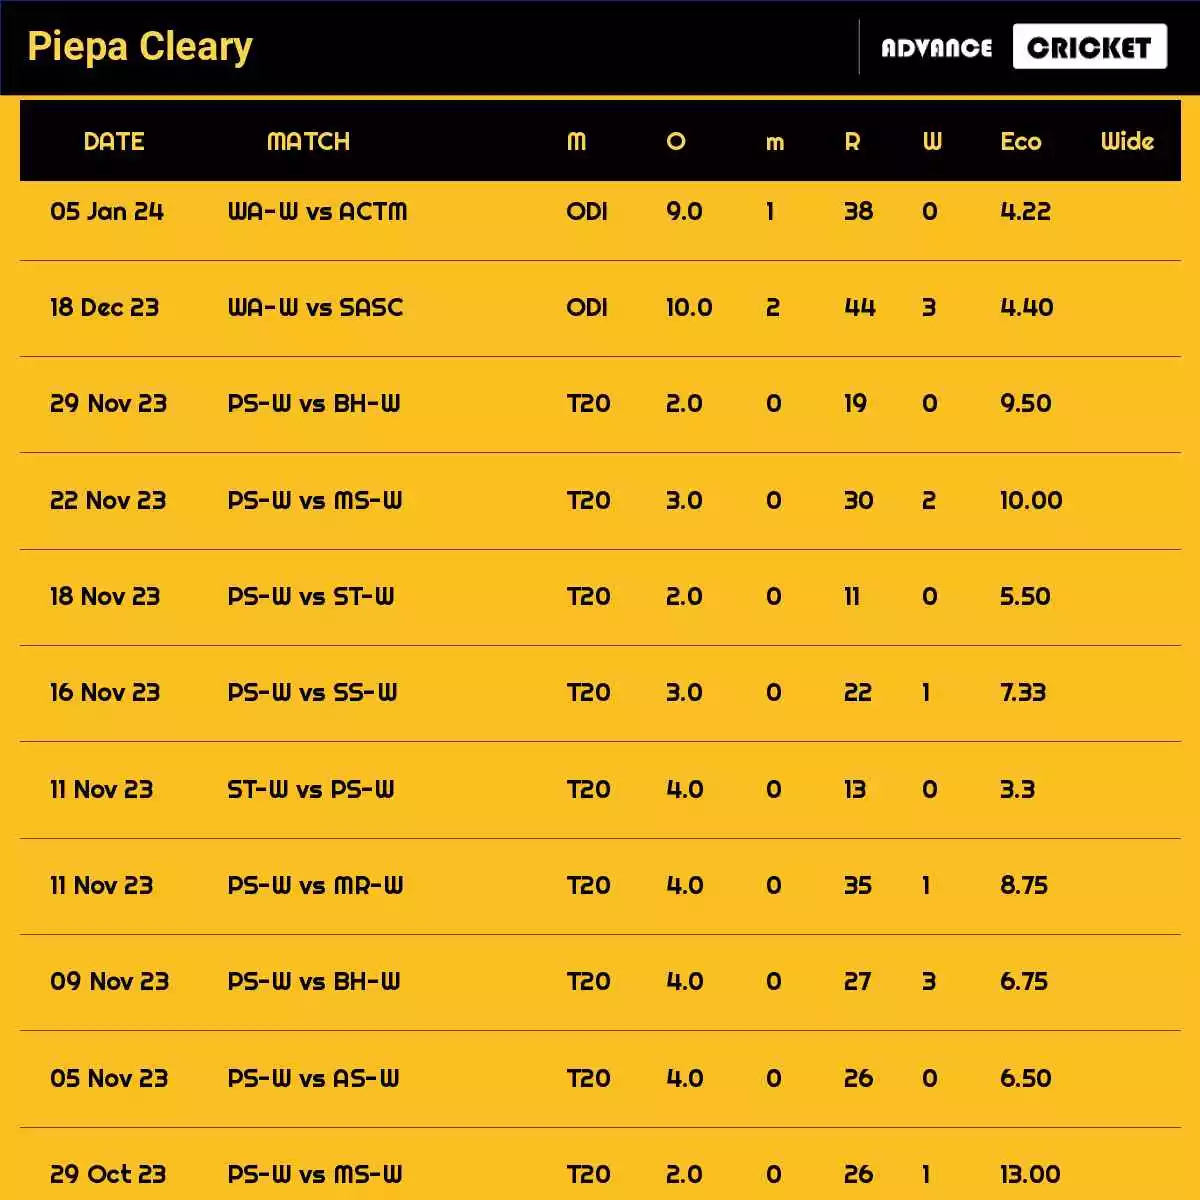 Piepa Cleary Recent Matches Details Date Wise